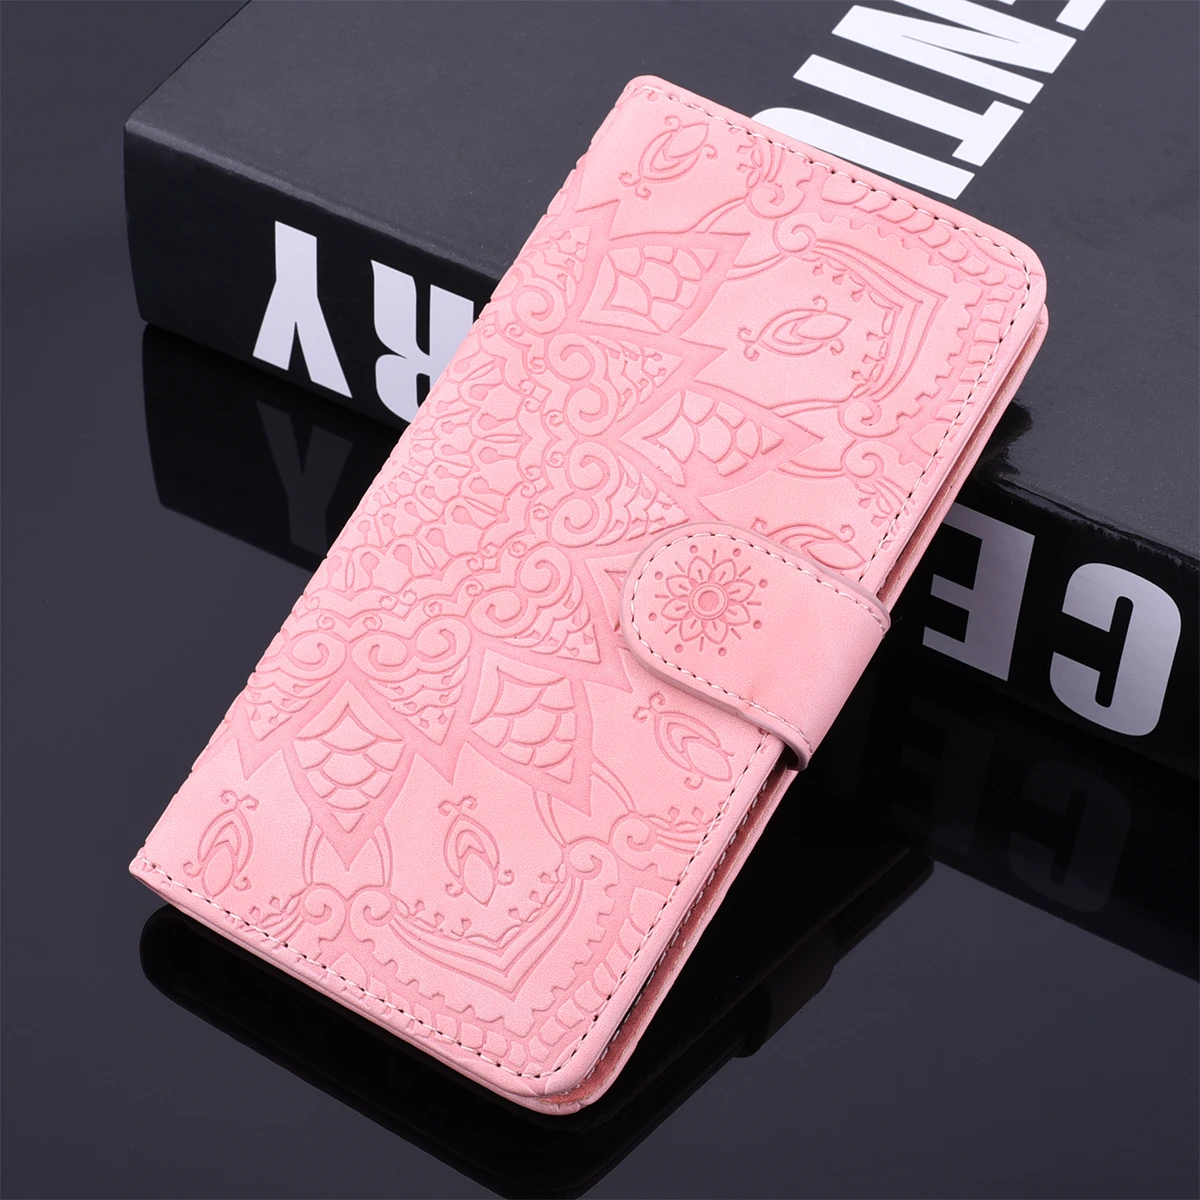 Flower Leather Book Case For Huawei P40 P20 P30 Pro Mate 20 10 Lite P Smart Z Y9 Y7 Y5 Y6 2019 Honor 10i 9C 8S Flip Wallet Coque cute huawei phone cases